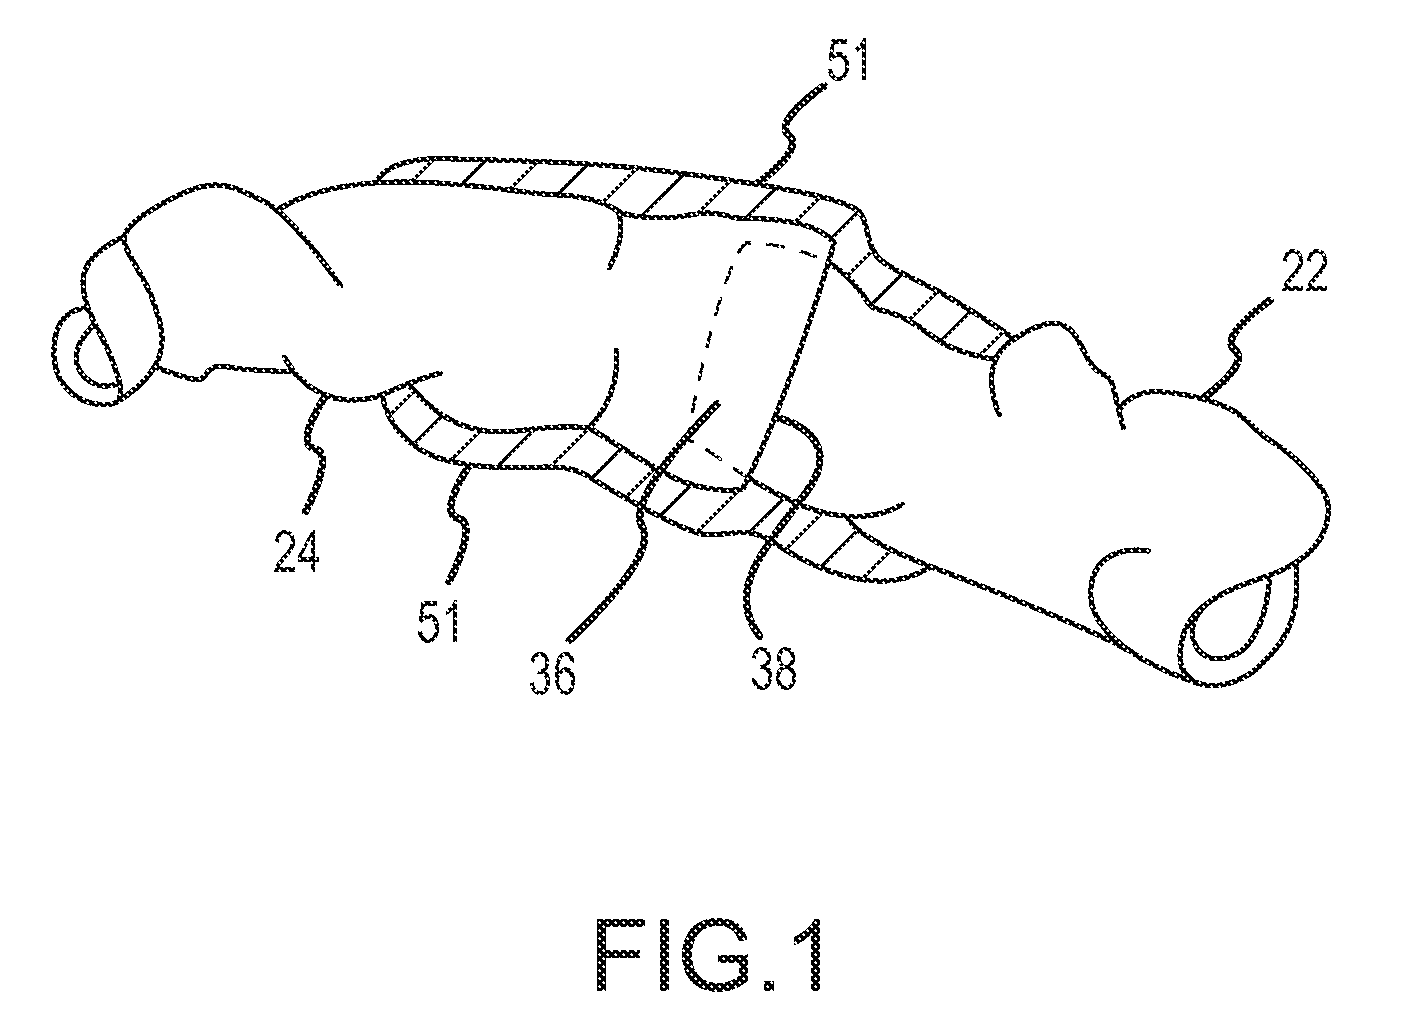 Methods and apparatus for surgical anastomosis